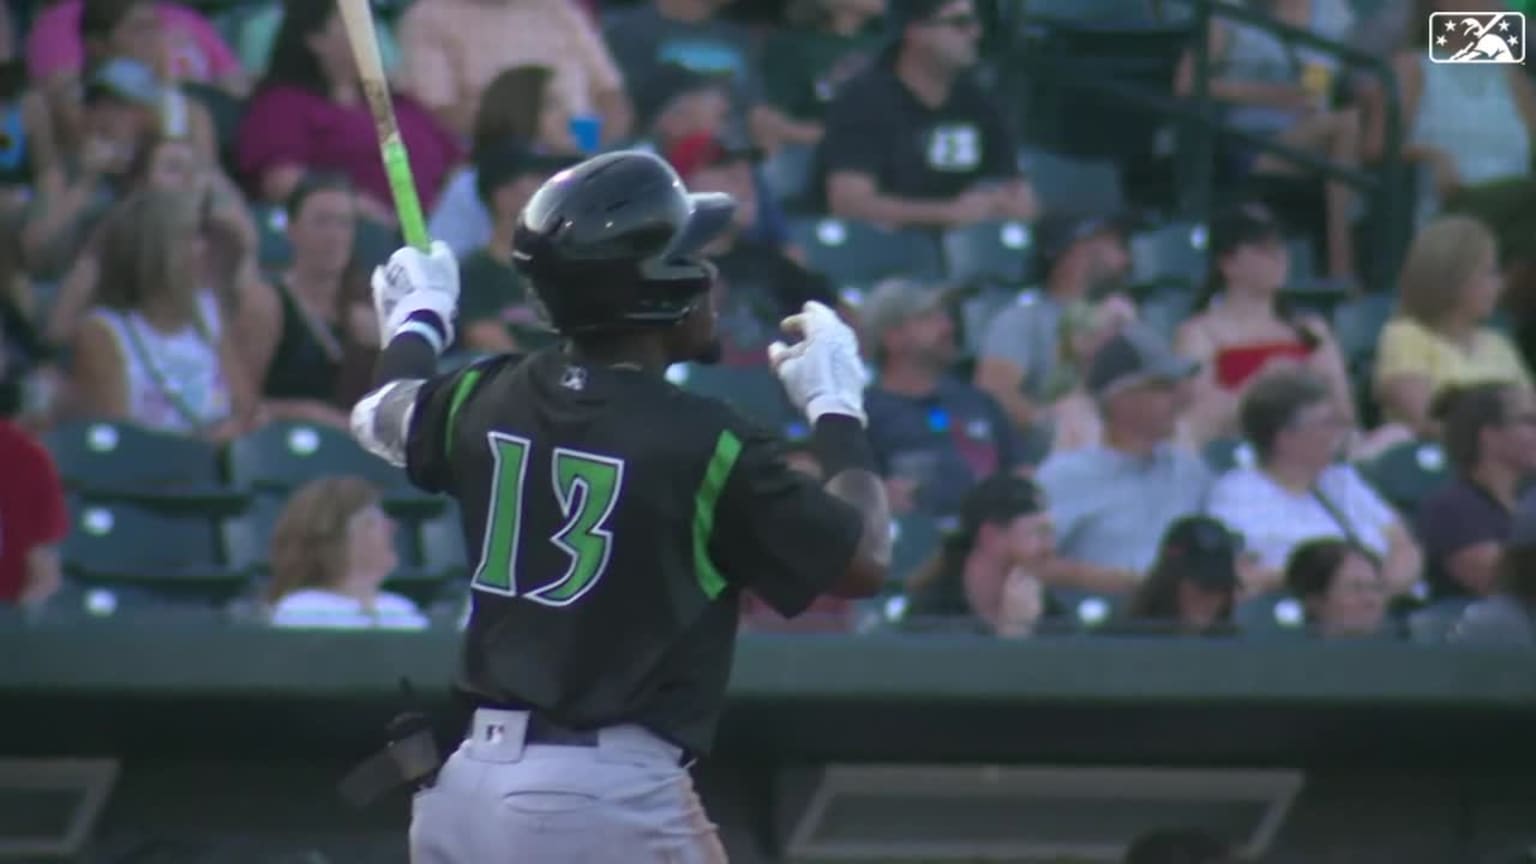 See which vintage Dayton Dragons player jerseys you can buy now